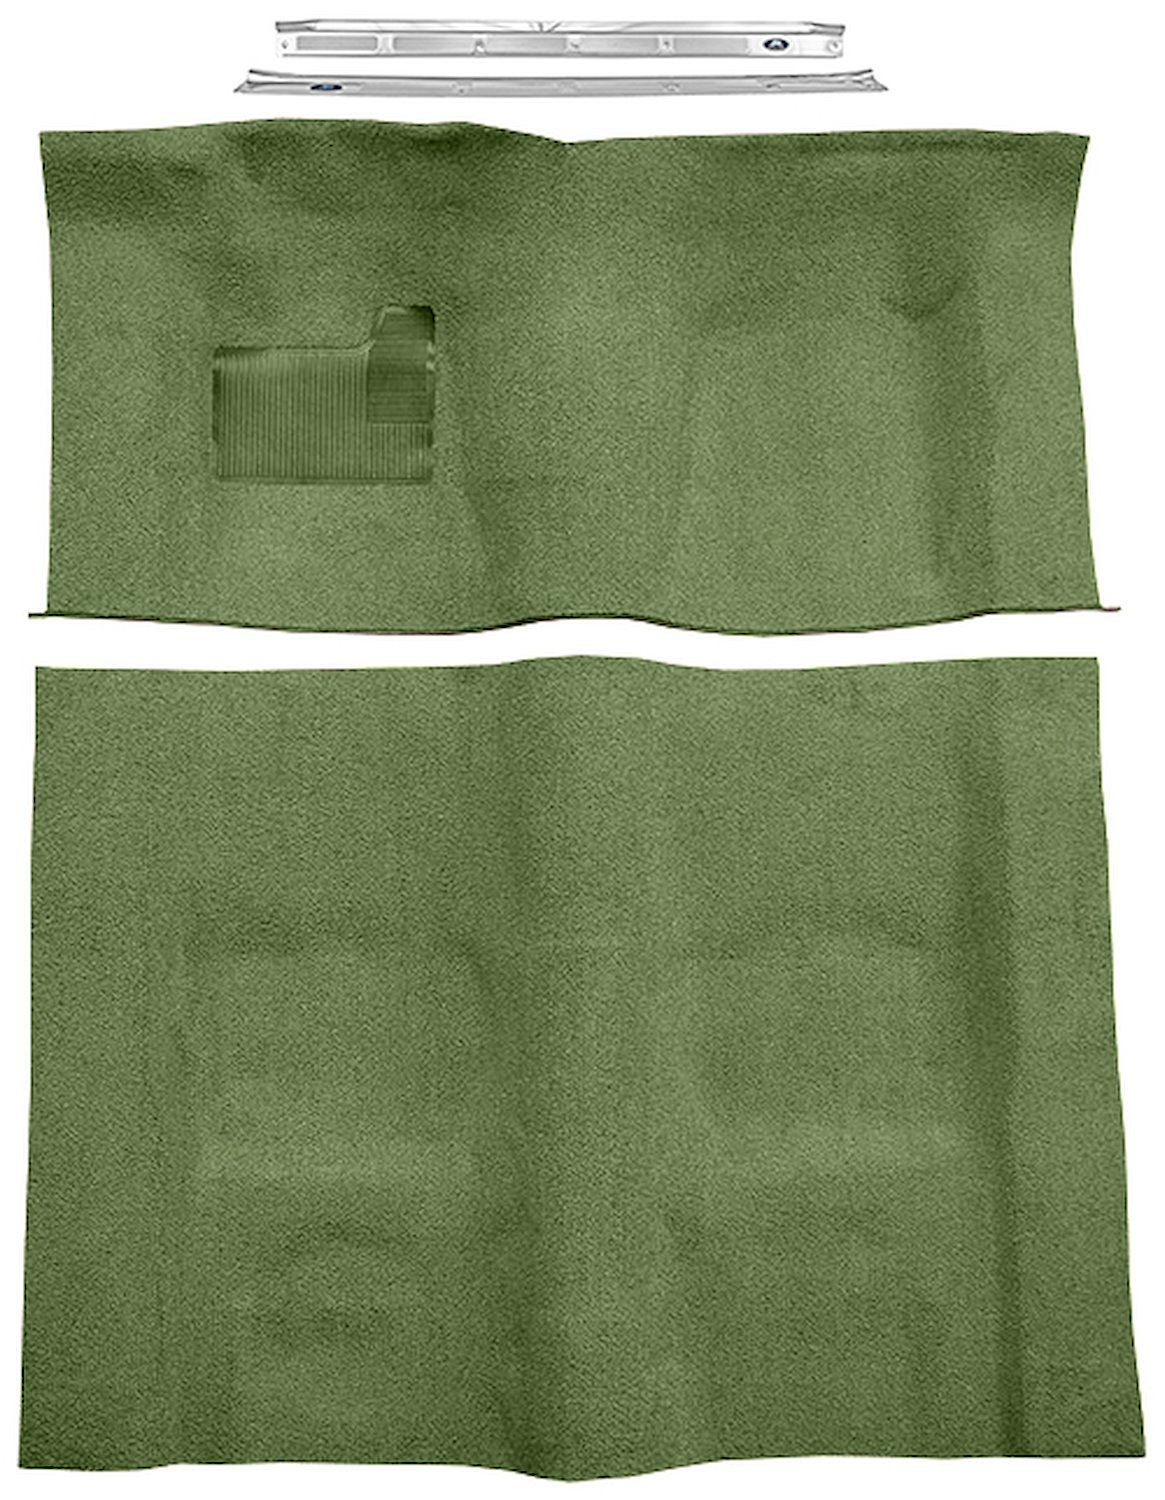 Willow Green Molded-Cut-Pile Carpet Kit for 1974-1975 Chevrolet Camaro, Pontiac Firebird w/Automatic Transmission [Mass Backing]